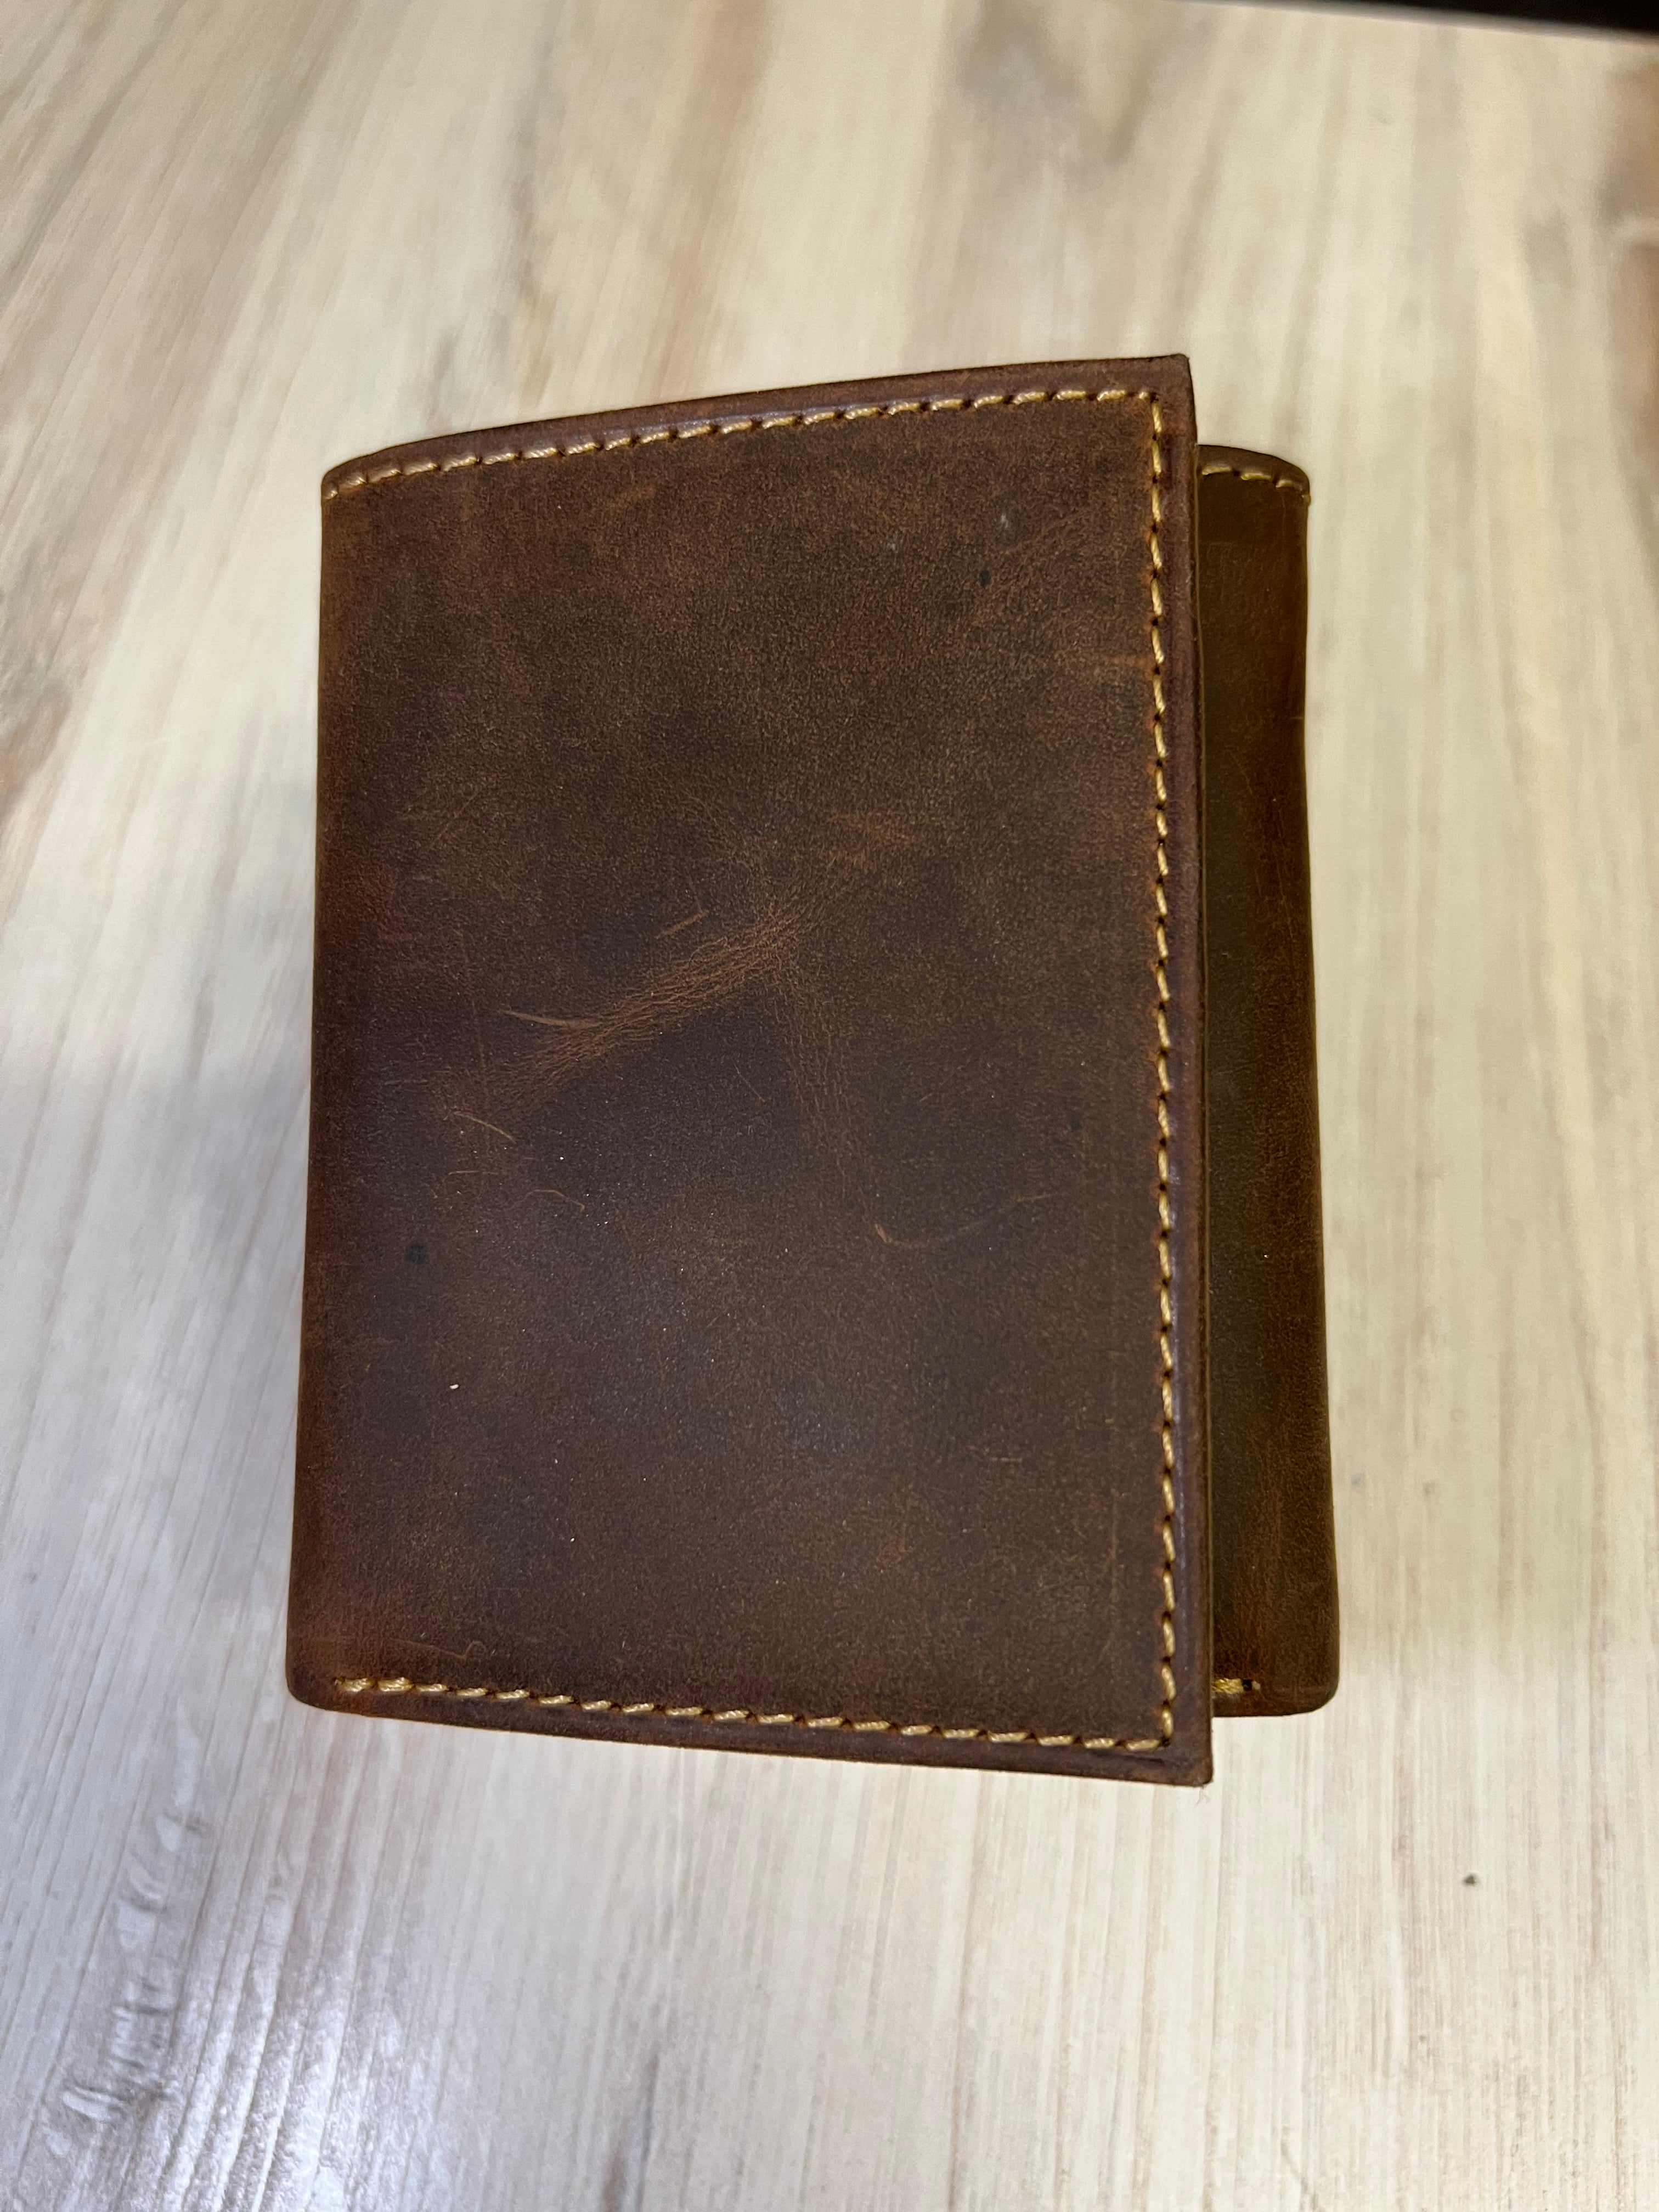 Black or Brown Leather Trifold Wallet 54359